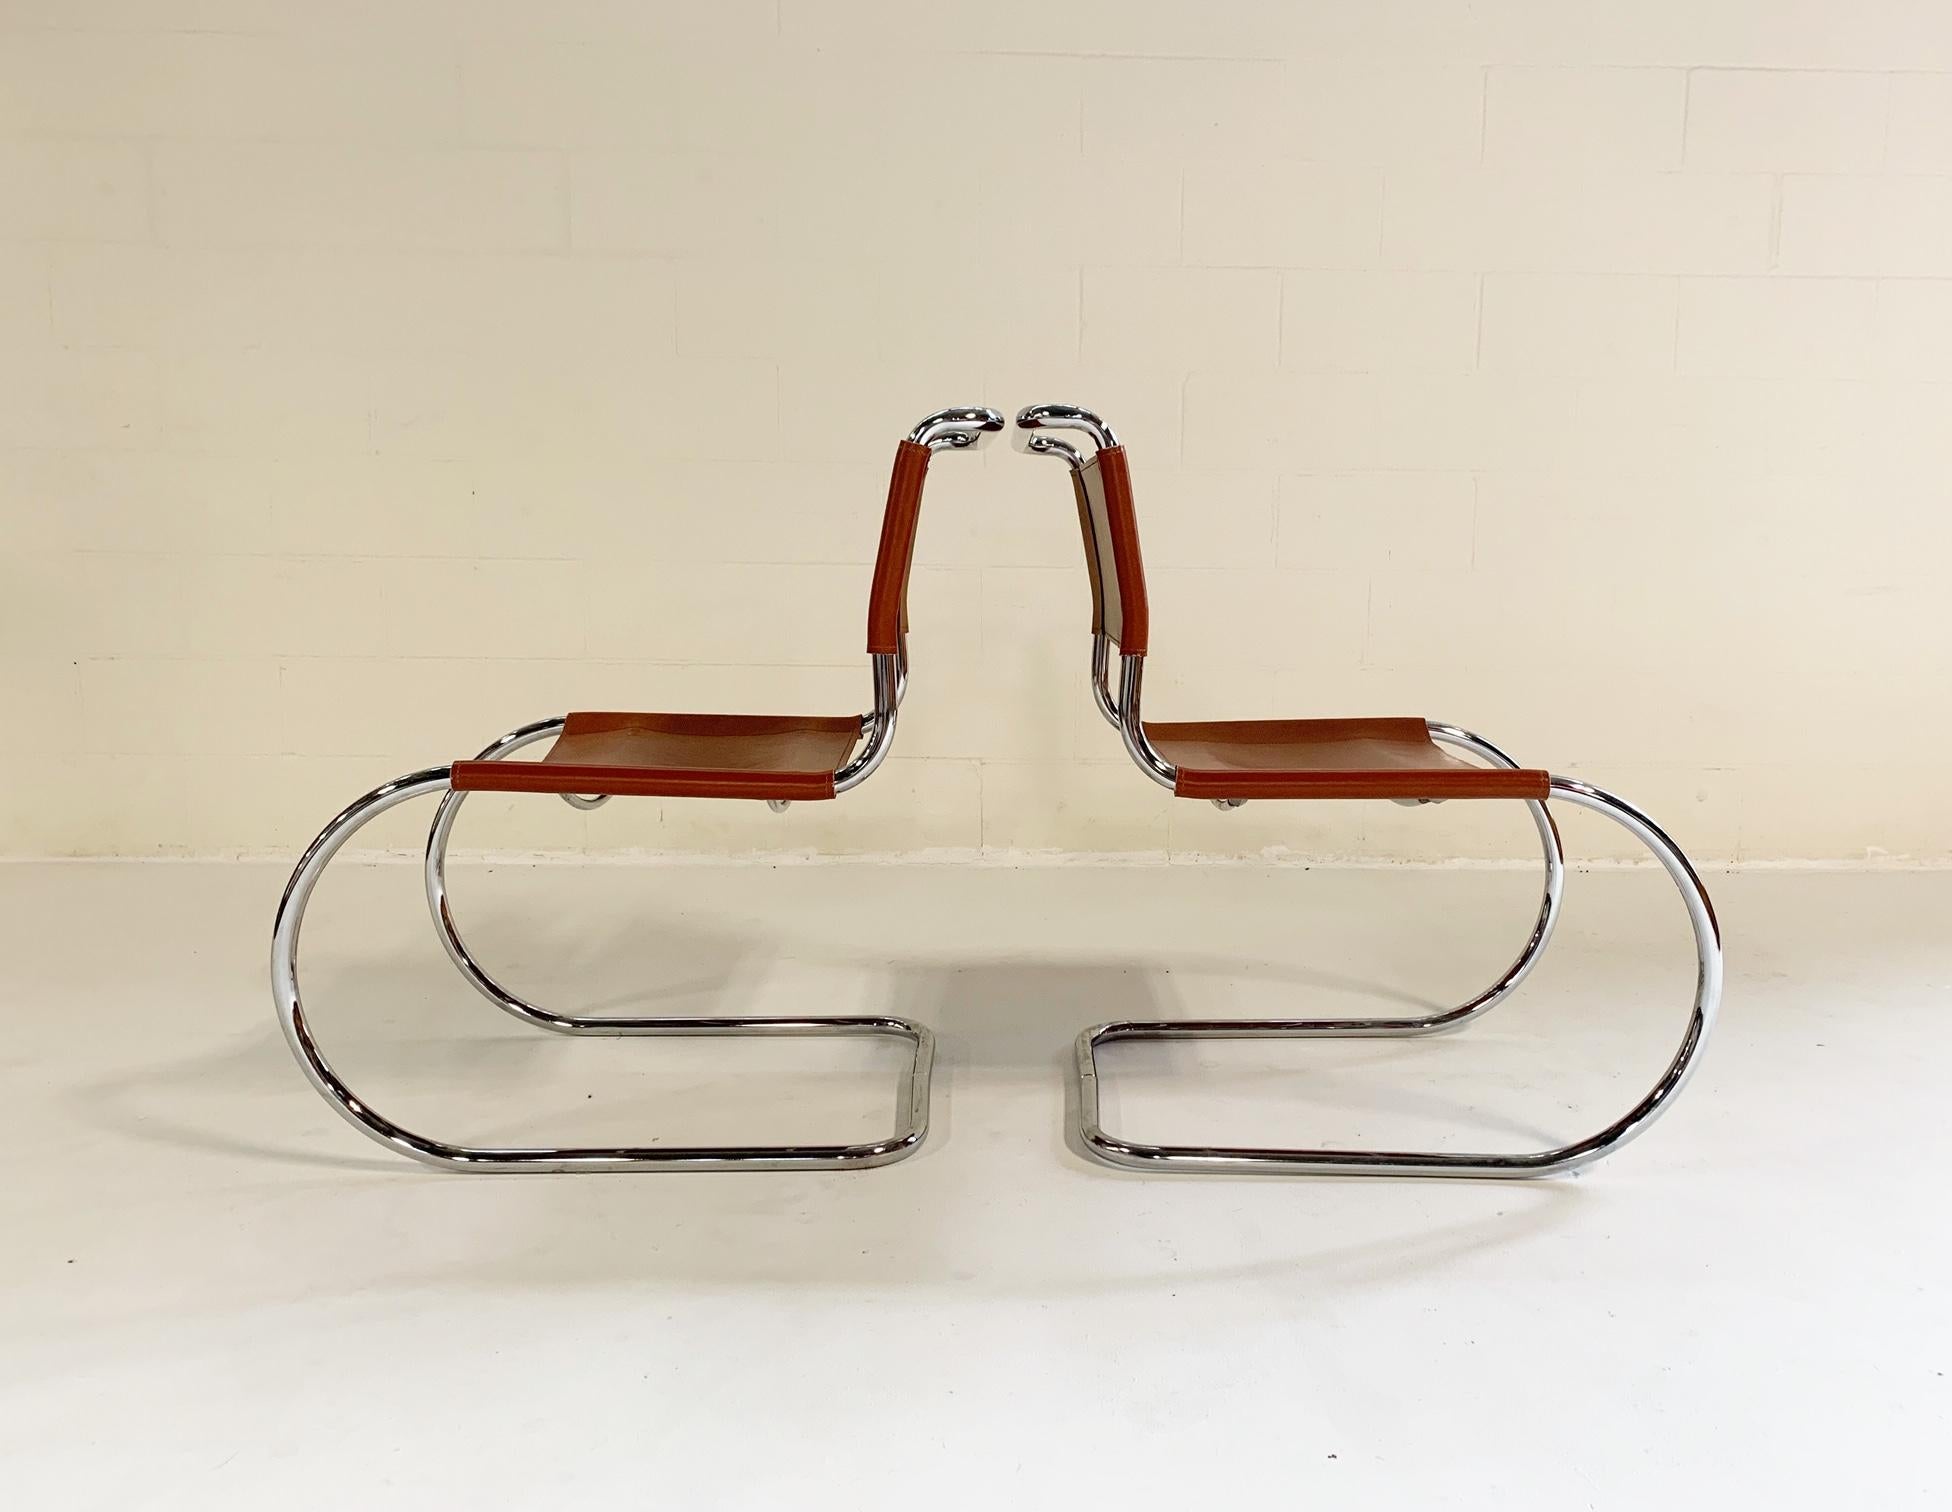 Icon. The MR chair designed by Mies van der Rohe is an instantly recognizable design. We collected this pair of MR chairs at auction. They are in excellent vintage condition. The caramel leather is in great shape.